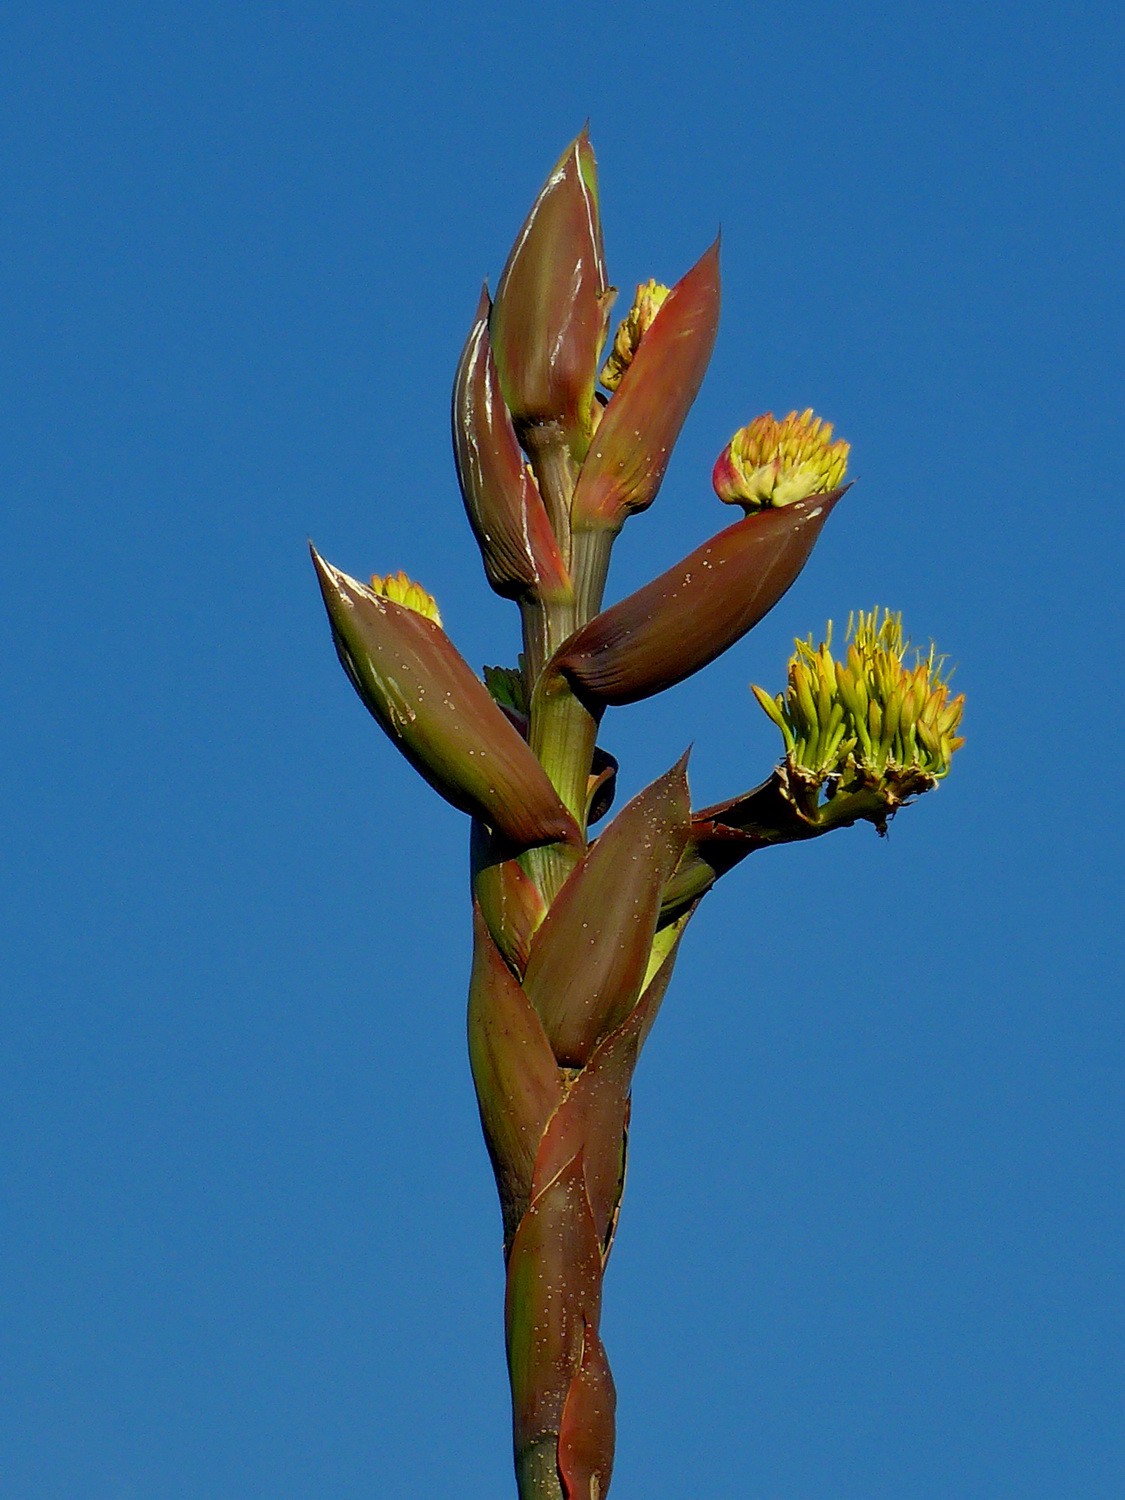 Flower of a agave